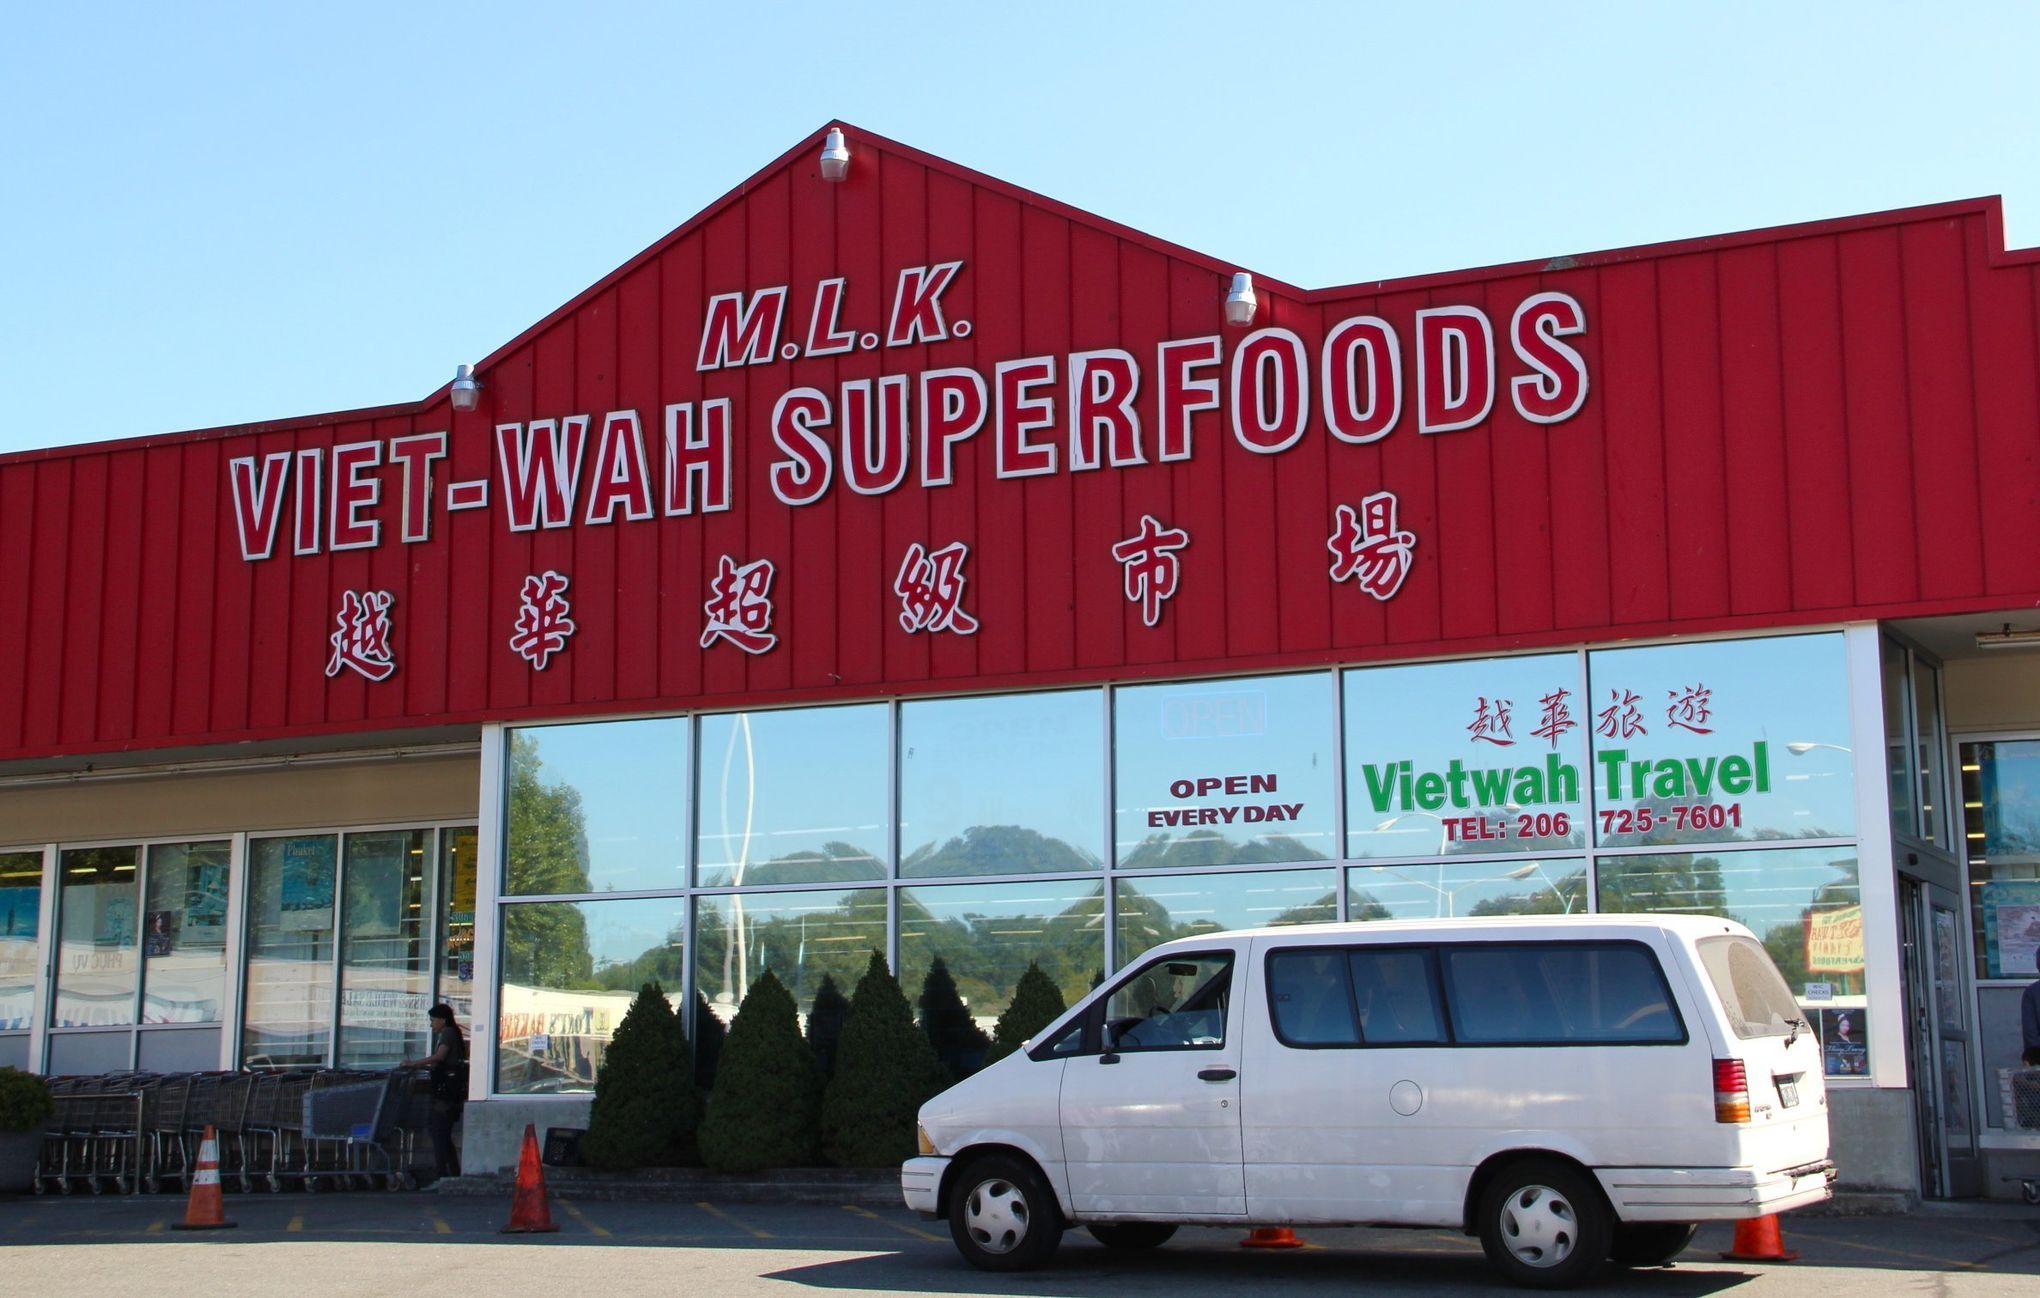 We will open on Thanksgiving - Lam's Seafood Asian Market